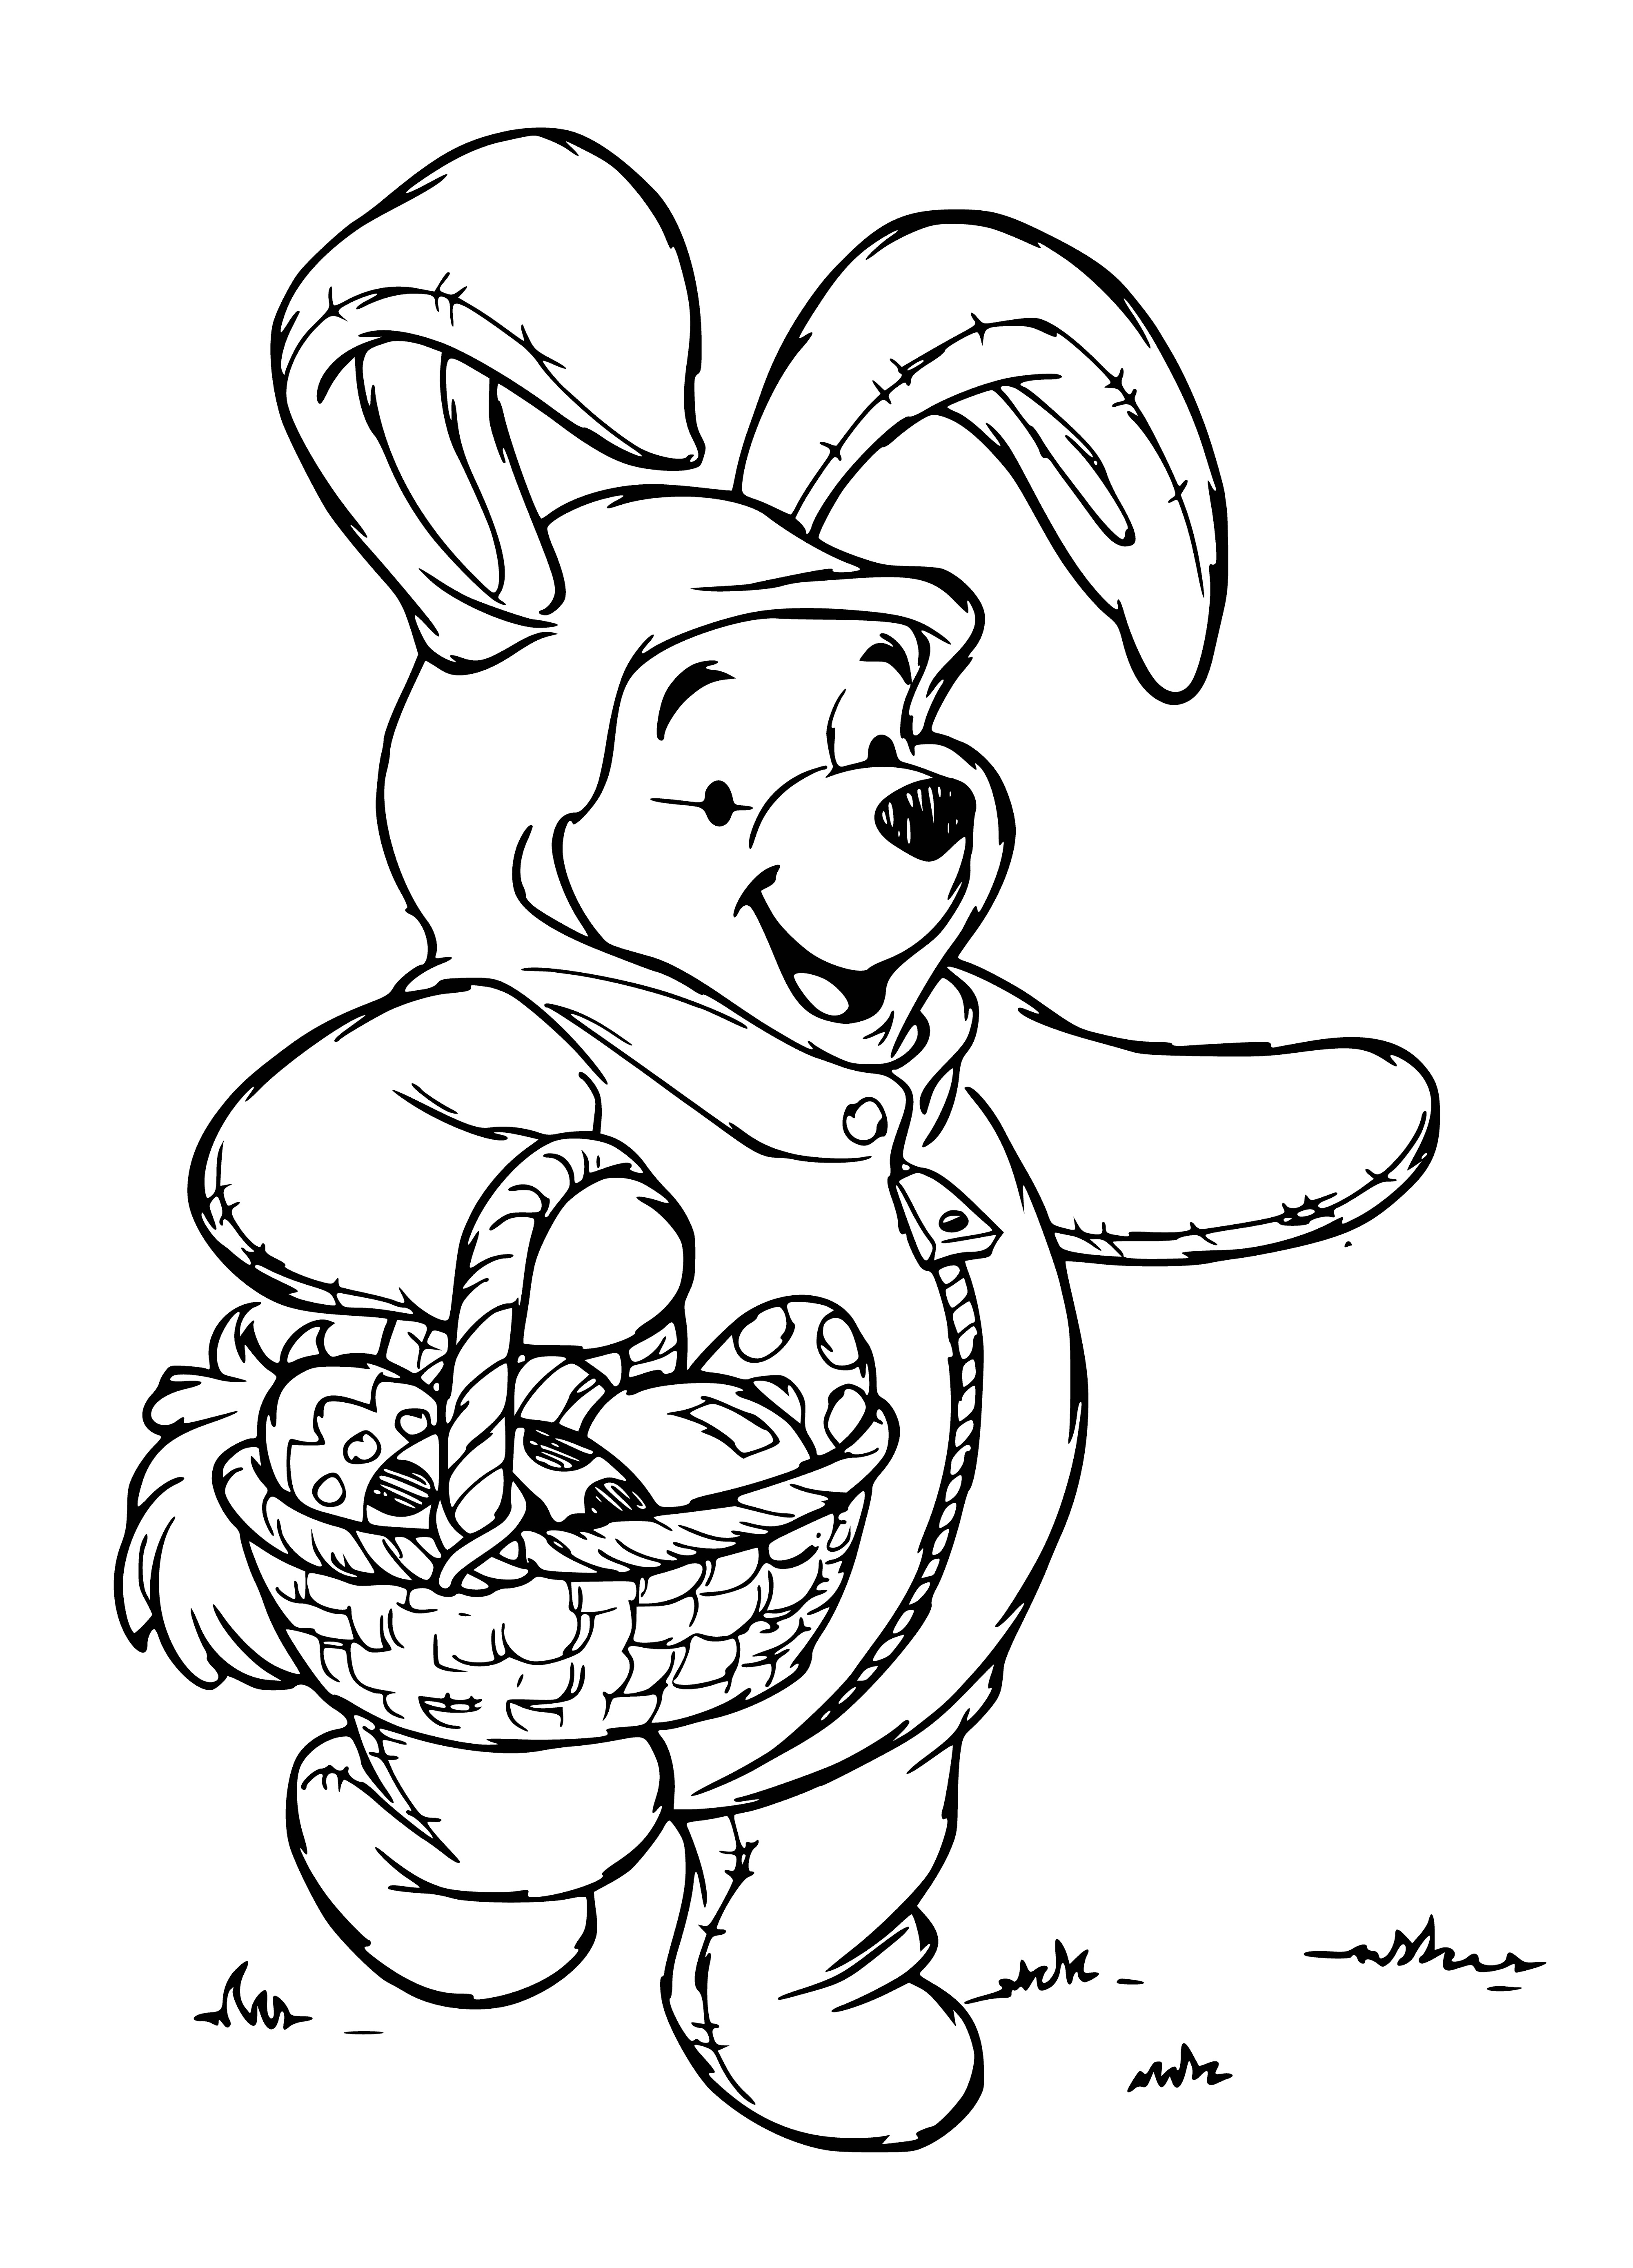 Winnie the Bear coloring page